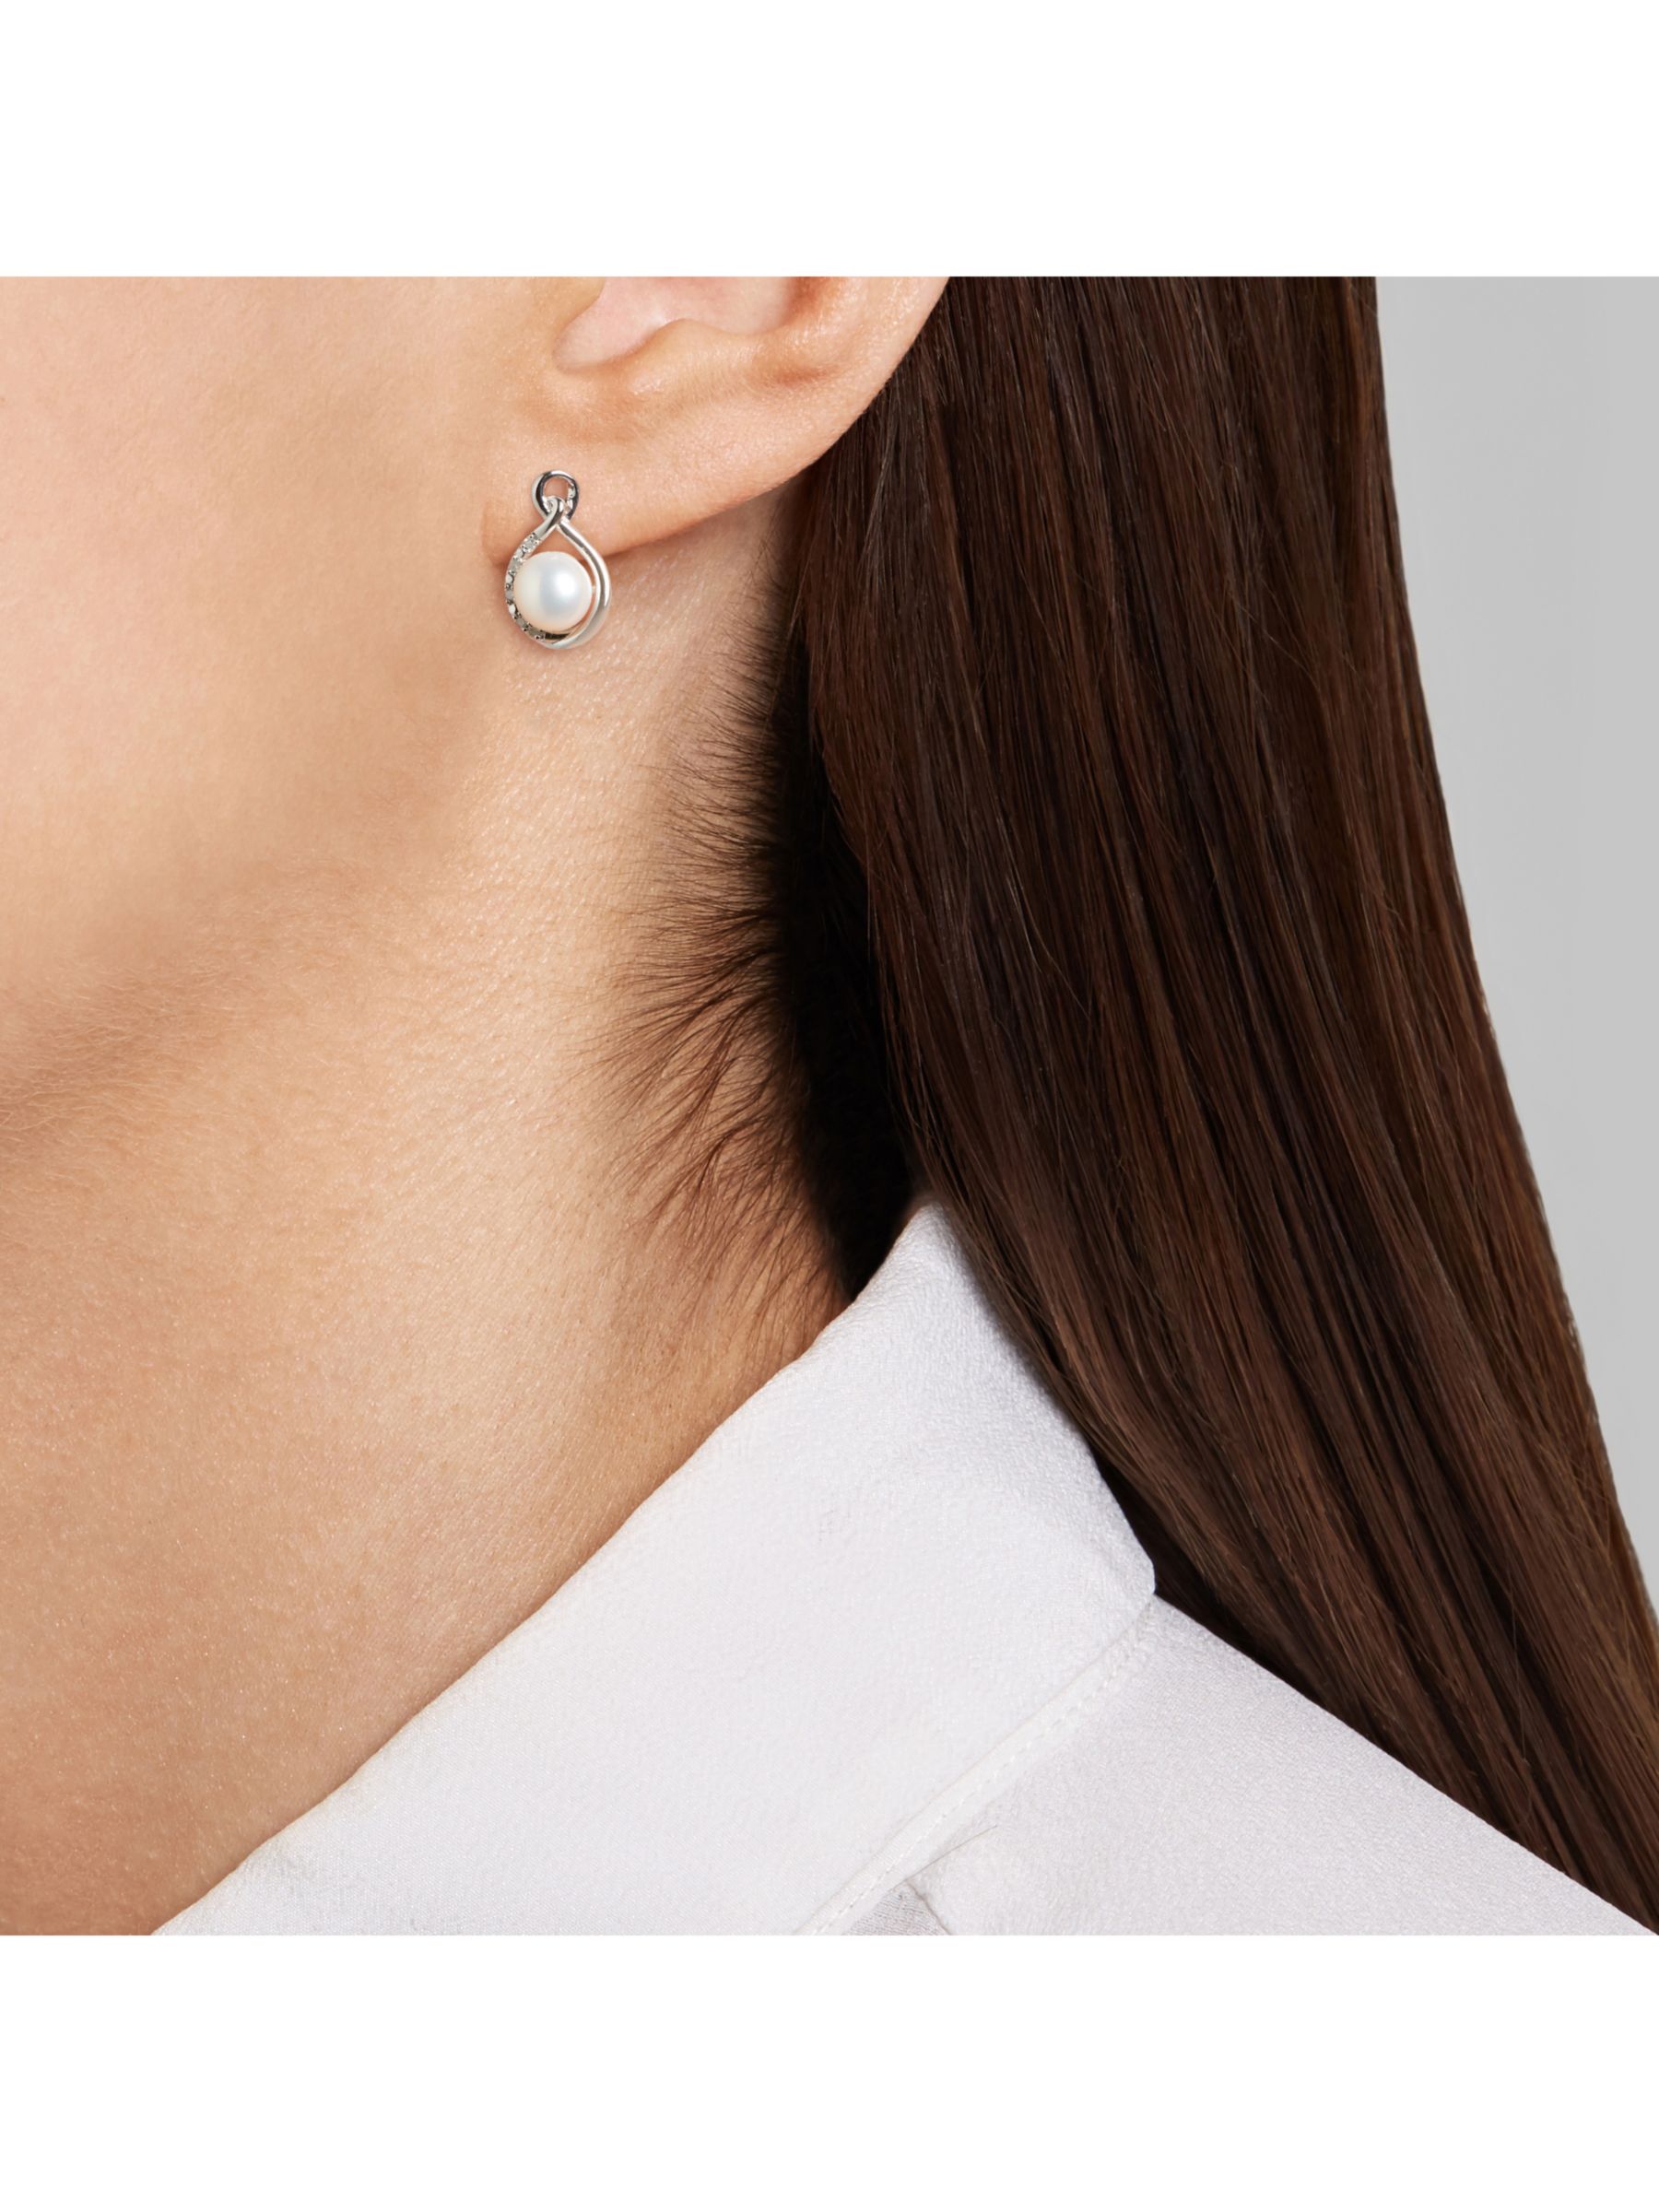 Buy A B Davis 9ct White Gold Freshwater Pearl and Diamond Stud Earrings, White Online at johnlewis.com